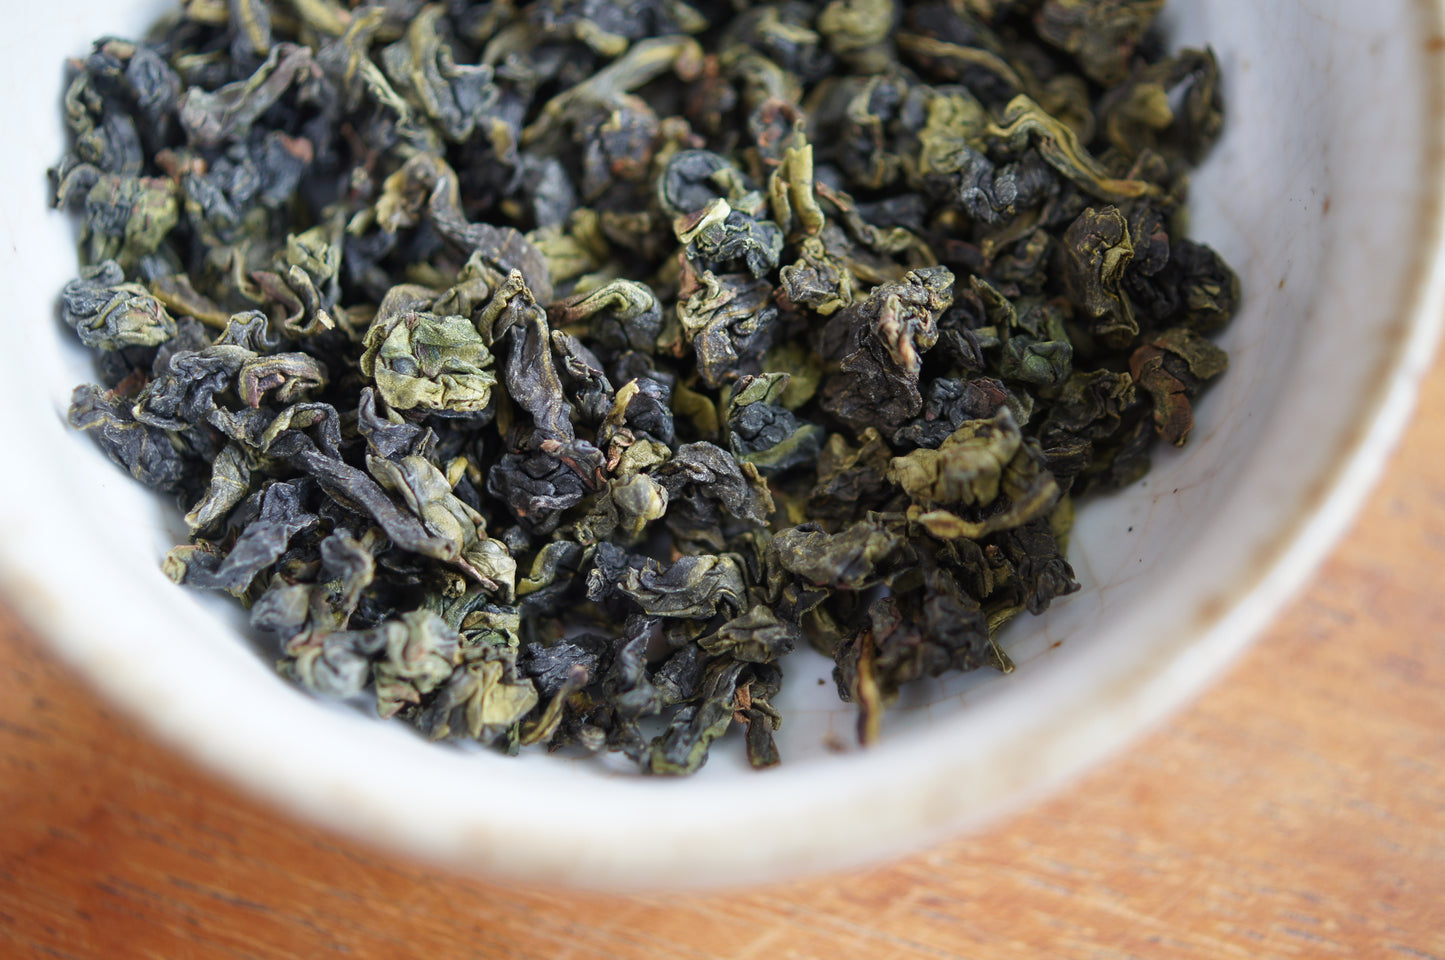 Spring Tieguanyin